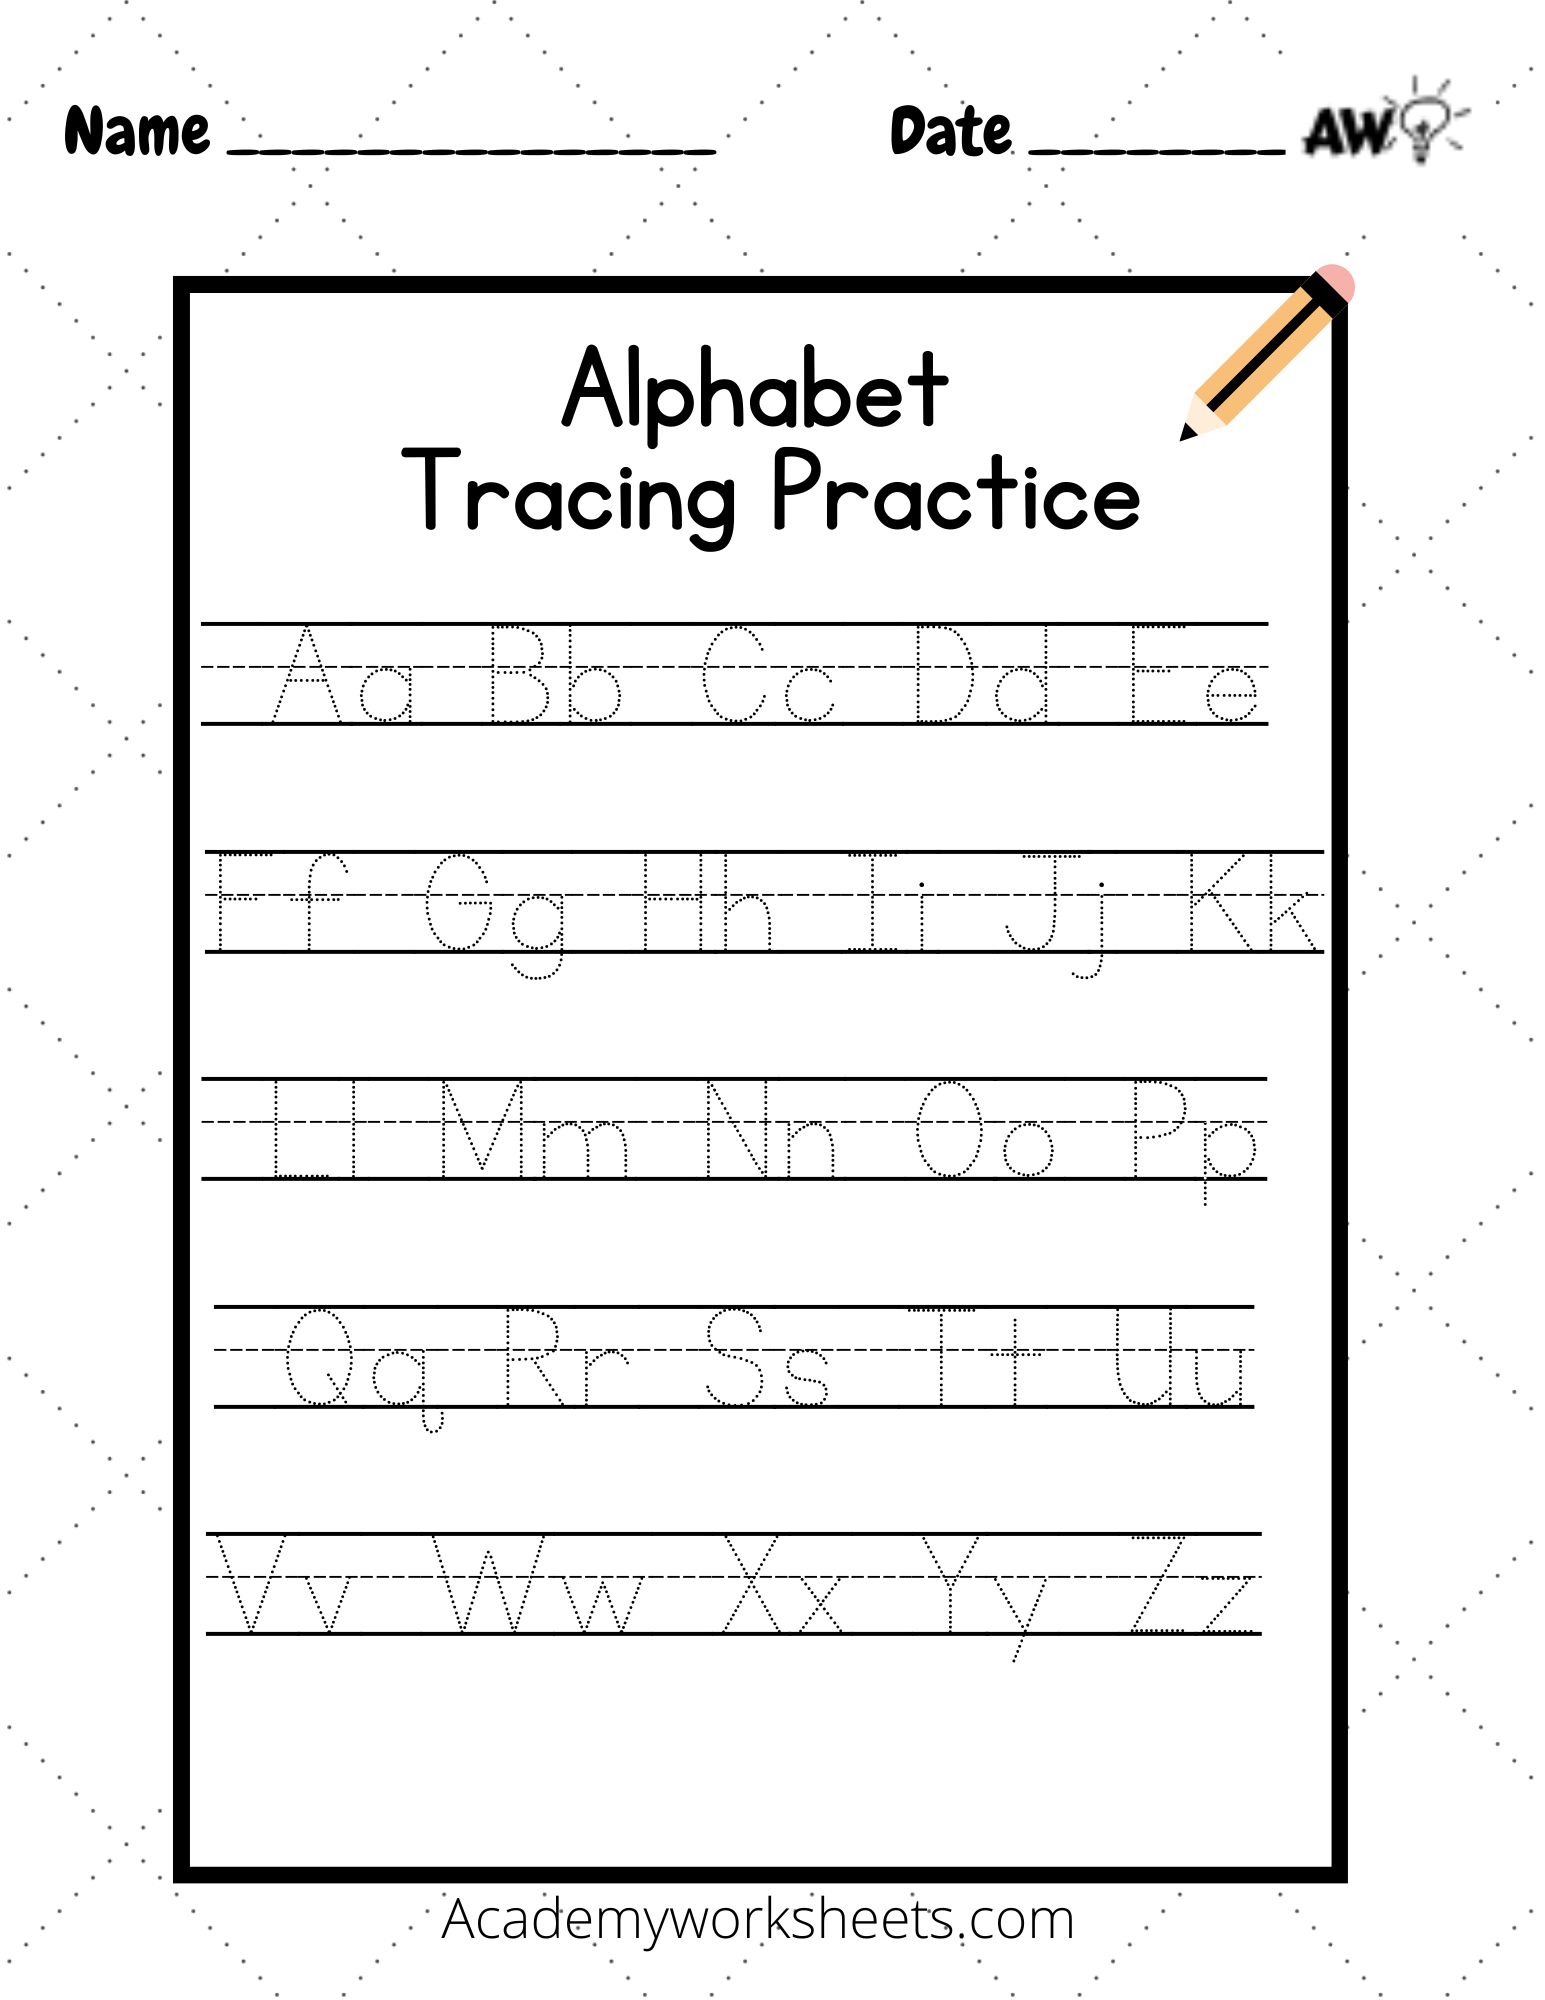 Letter Tracing Worksheets handwriting abc worksheets - Academy Worksheets